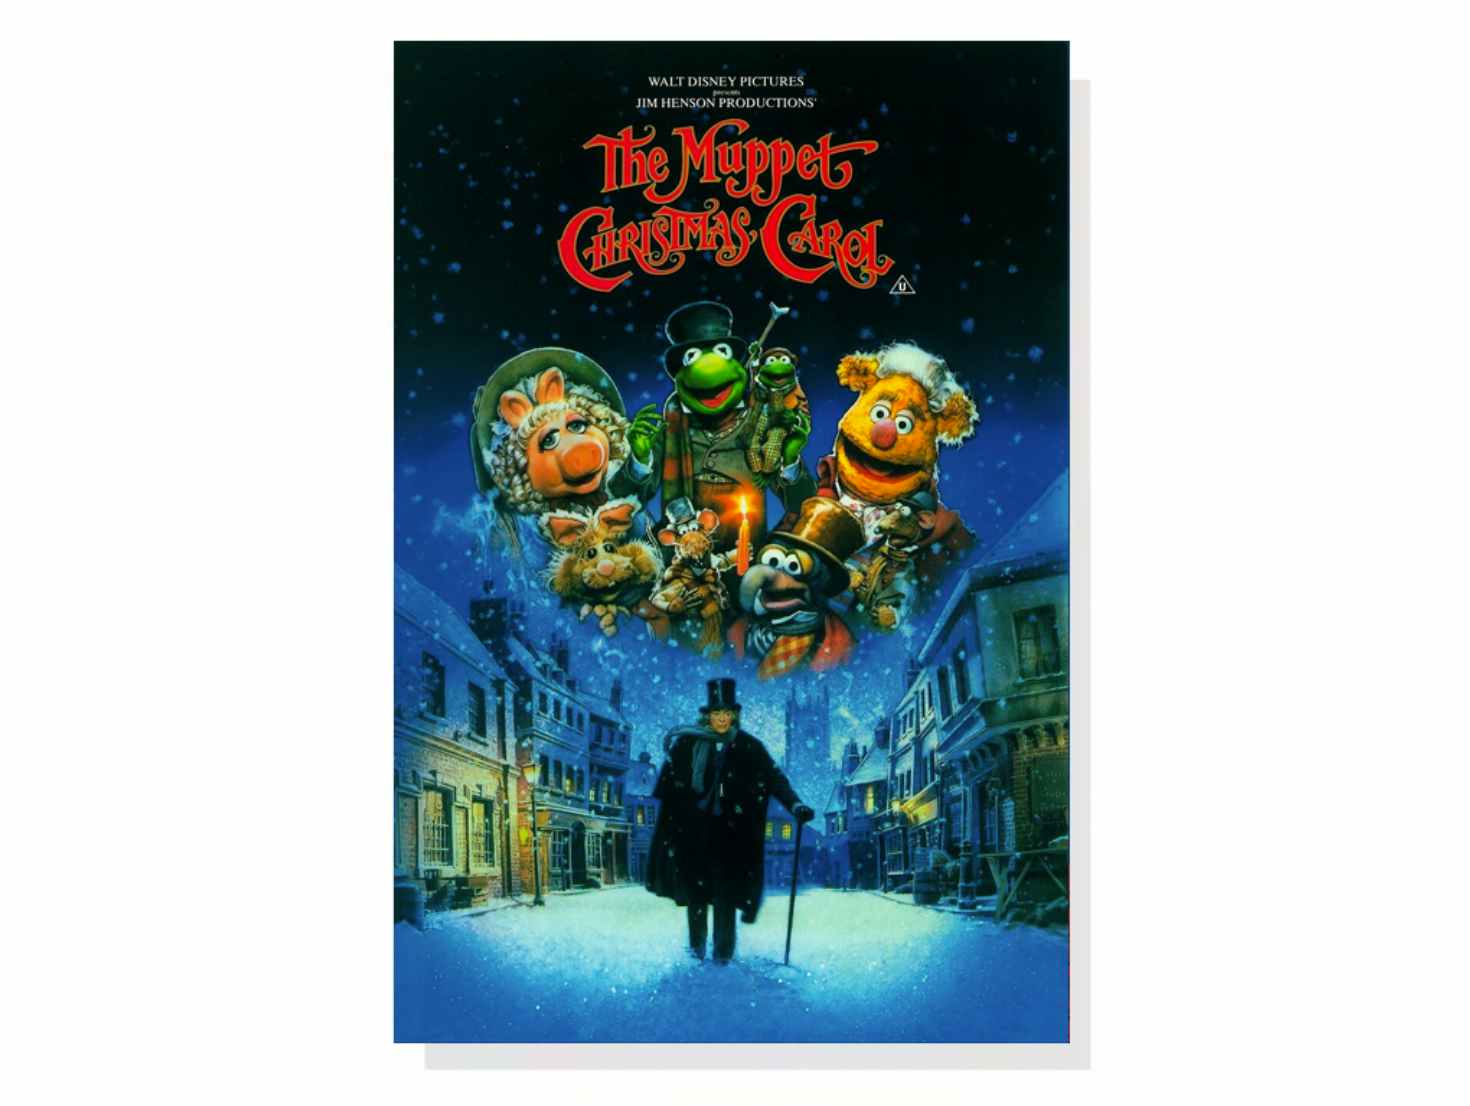 Movie poster for Muppet Christmas Carol, one of the best Christmas movies on Disney Plus.